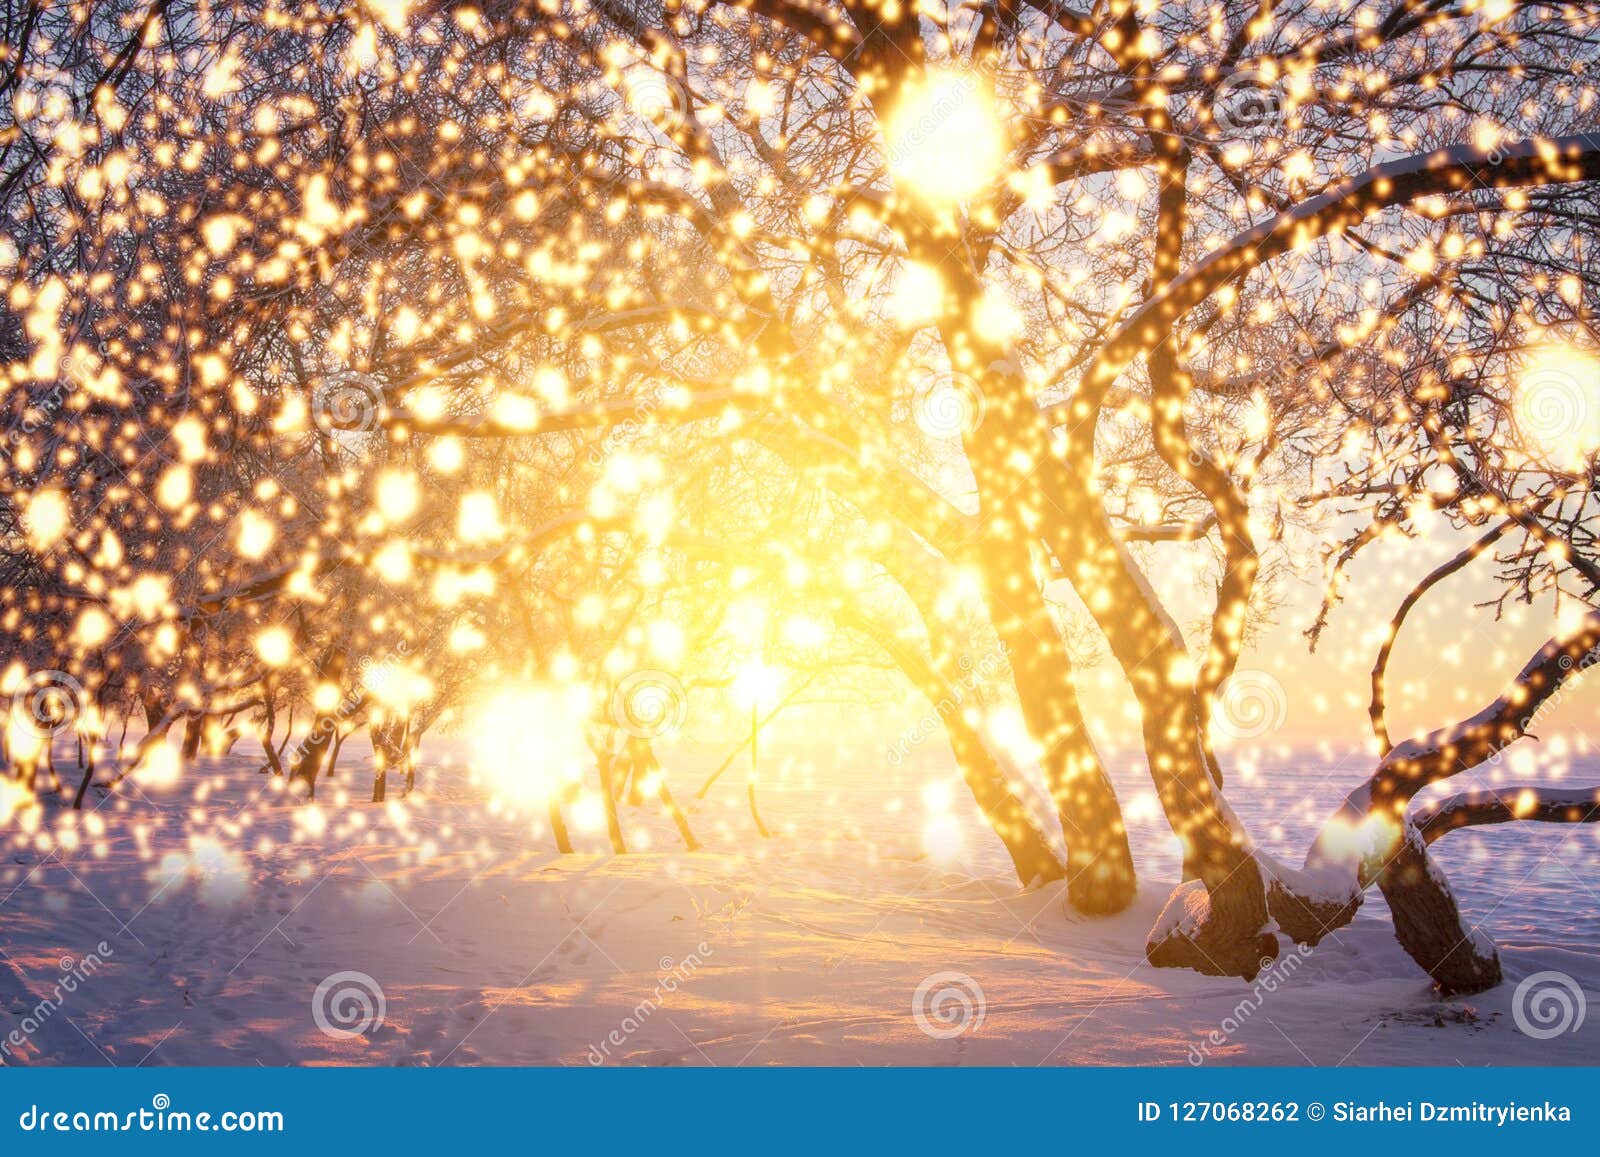 blød Offentliggørelse Akkumulering Christmas Background with Glowing Snowflakes. Shining Magic Lights in  Winter Nature. Scenery Winter Fairytale. Stock Photo - Image of happy,  shine: 127068262